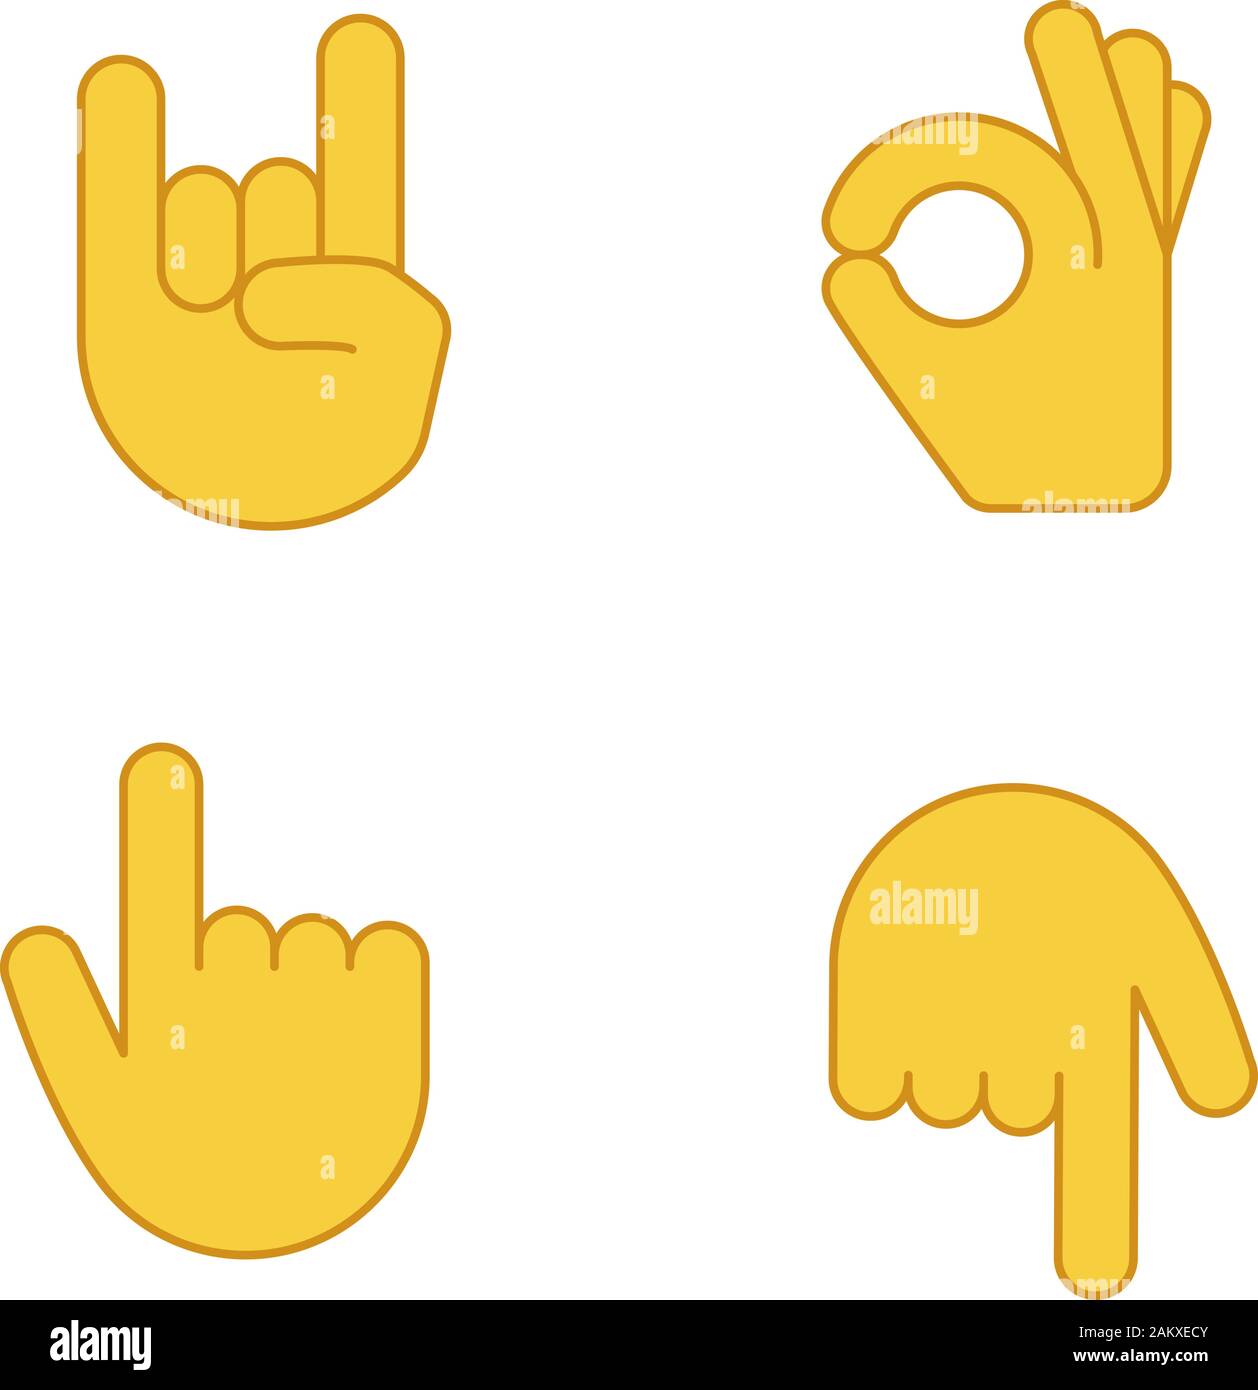 Hand gesture emojis color icons set. Rock on, heavy metal, OK, approval gesturing. Backhand index pointing up and down. Turn back finger pointer. Isol Stock Vector